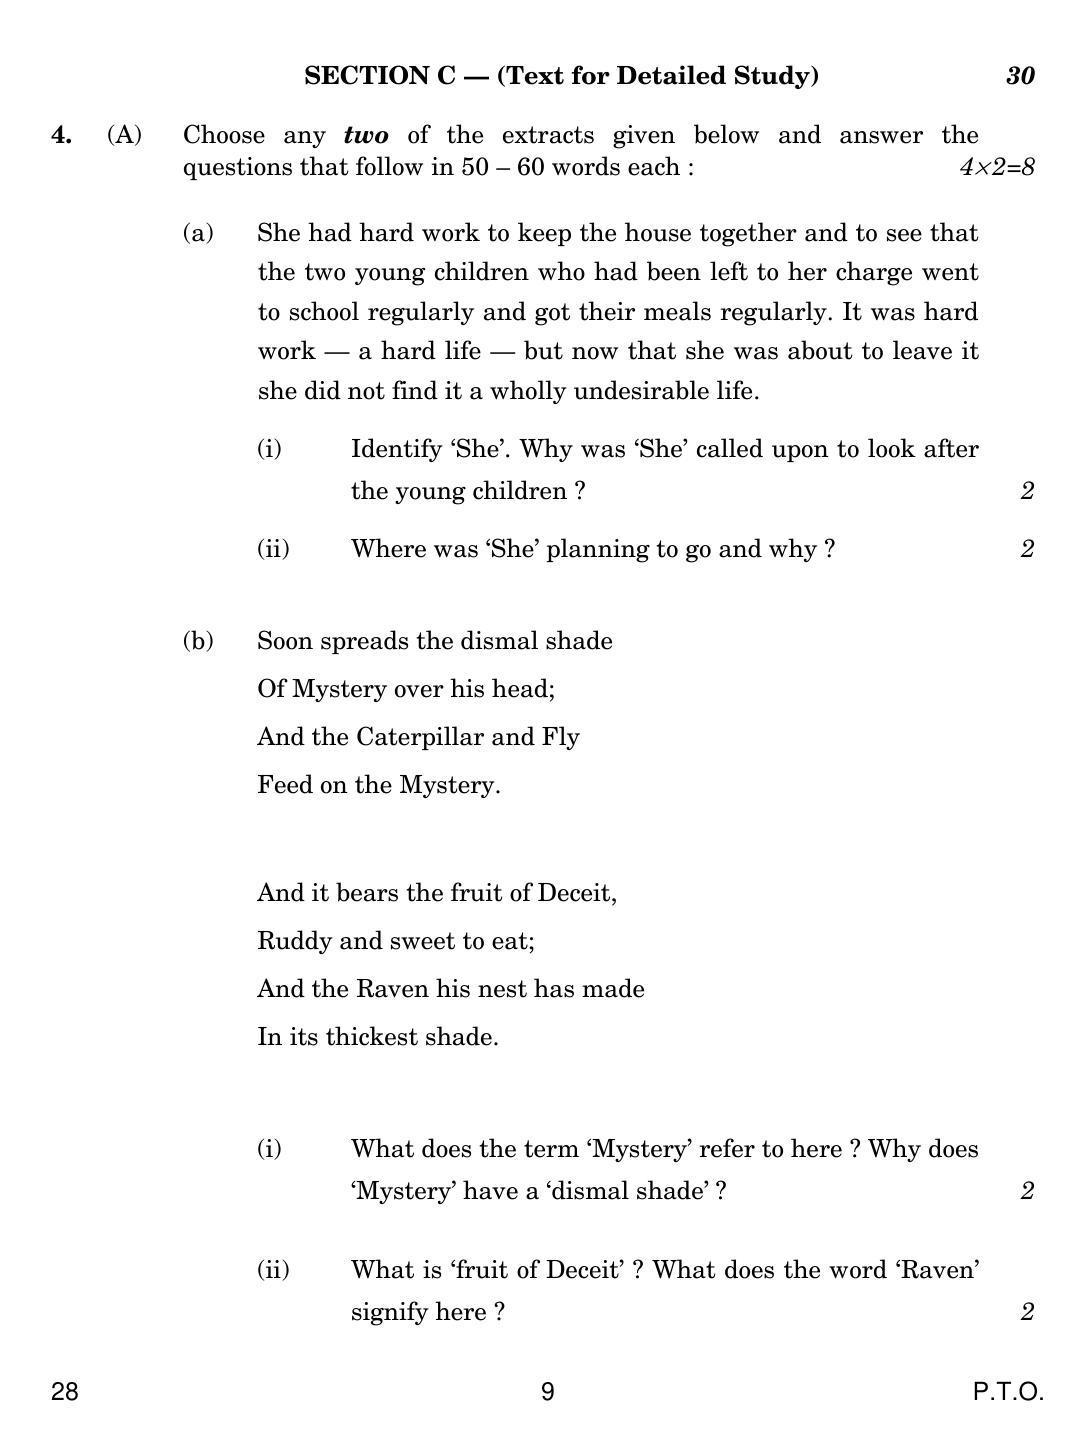 CBSE Class 12 28 ENGLISH ELECTIVE NCERT 2018 Question Paper - Page 9